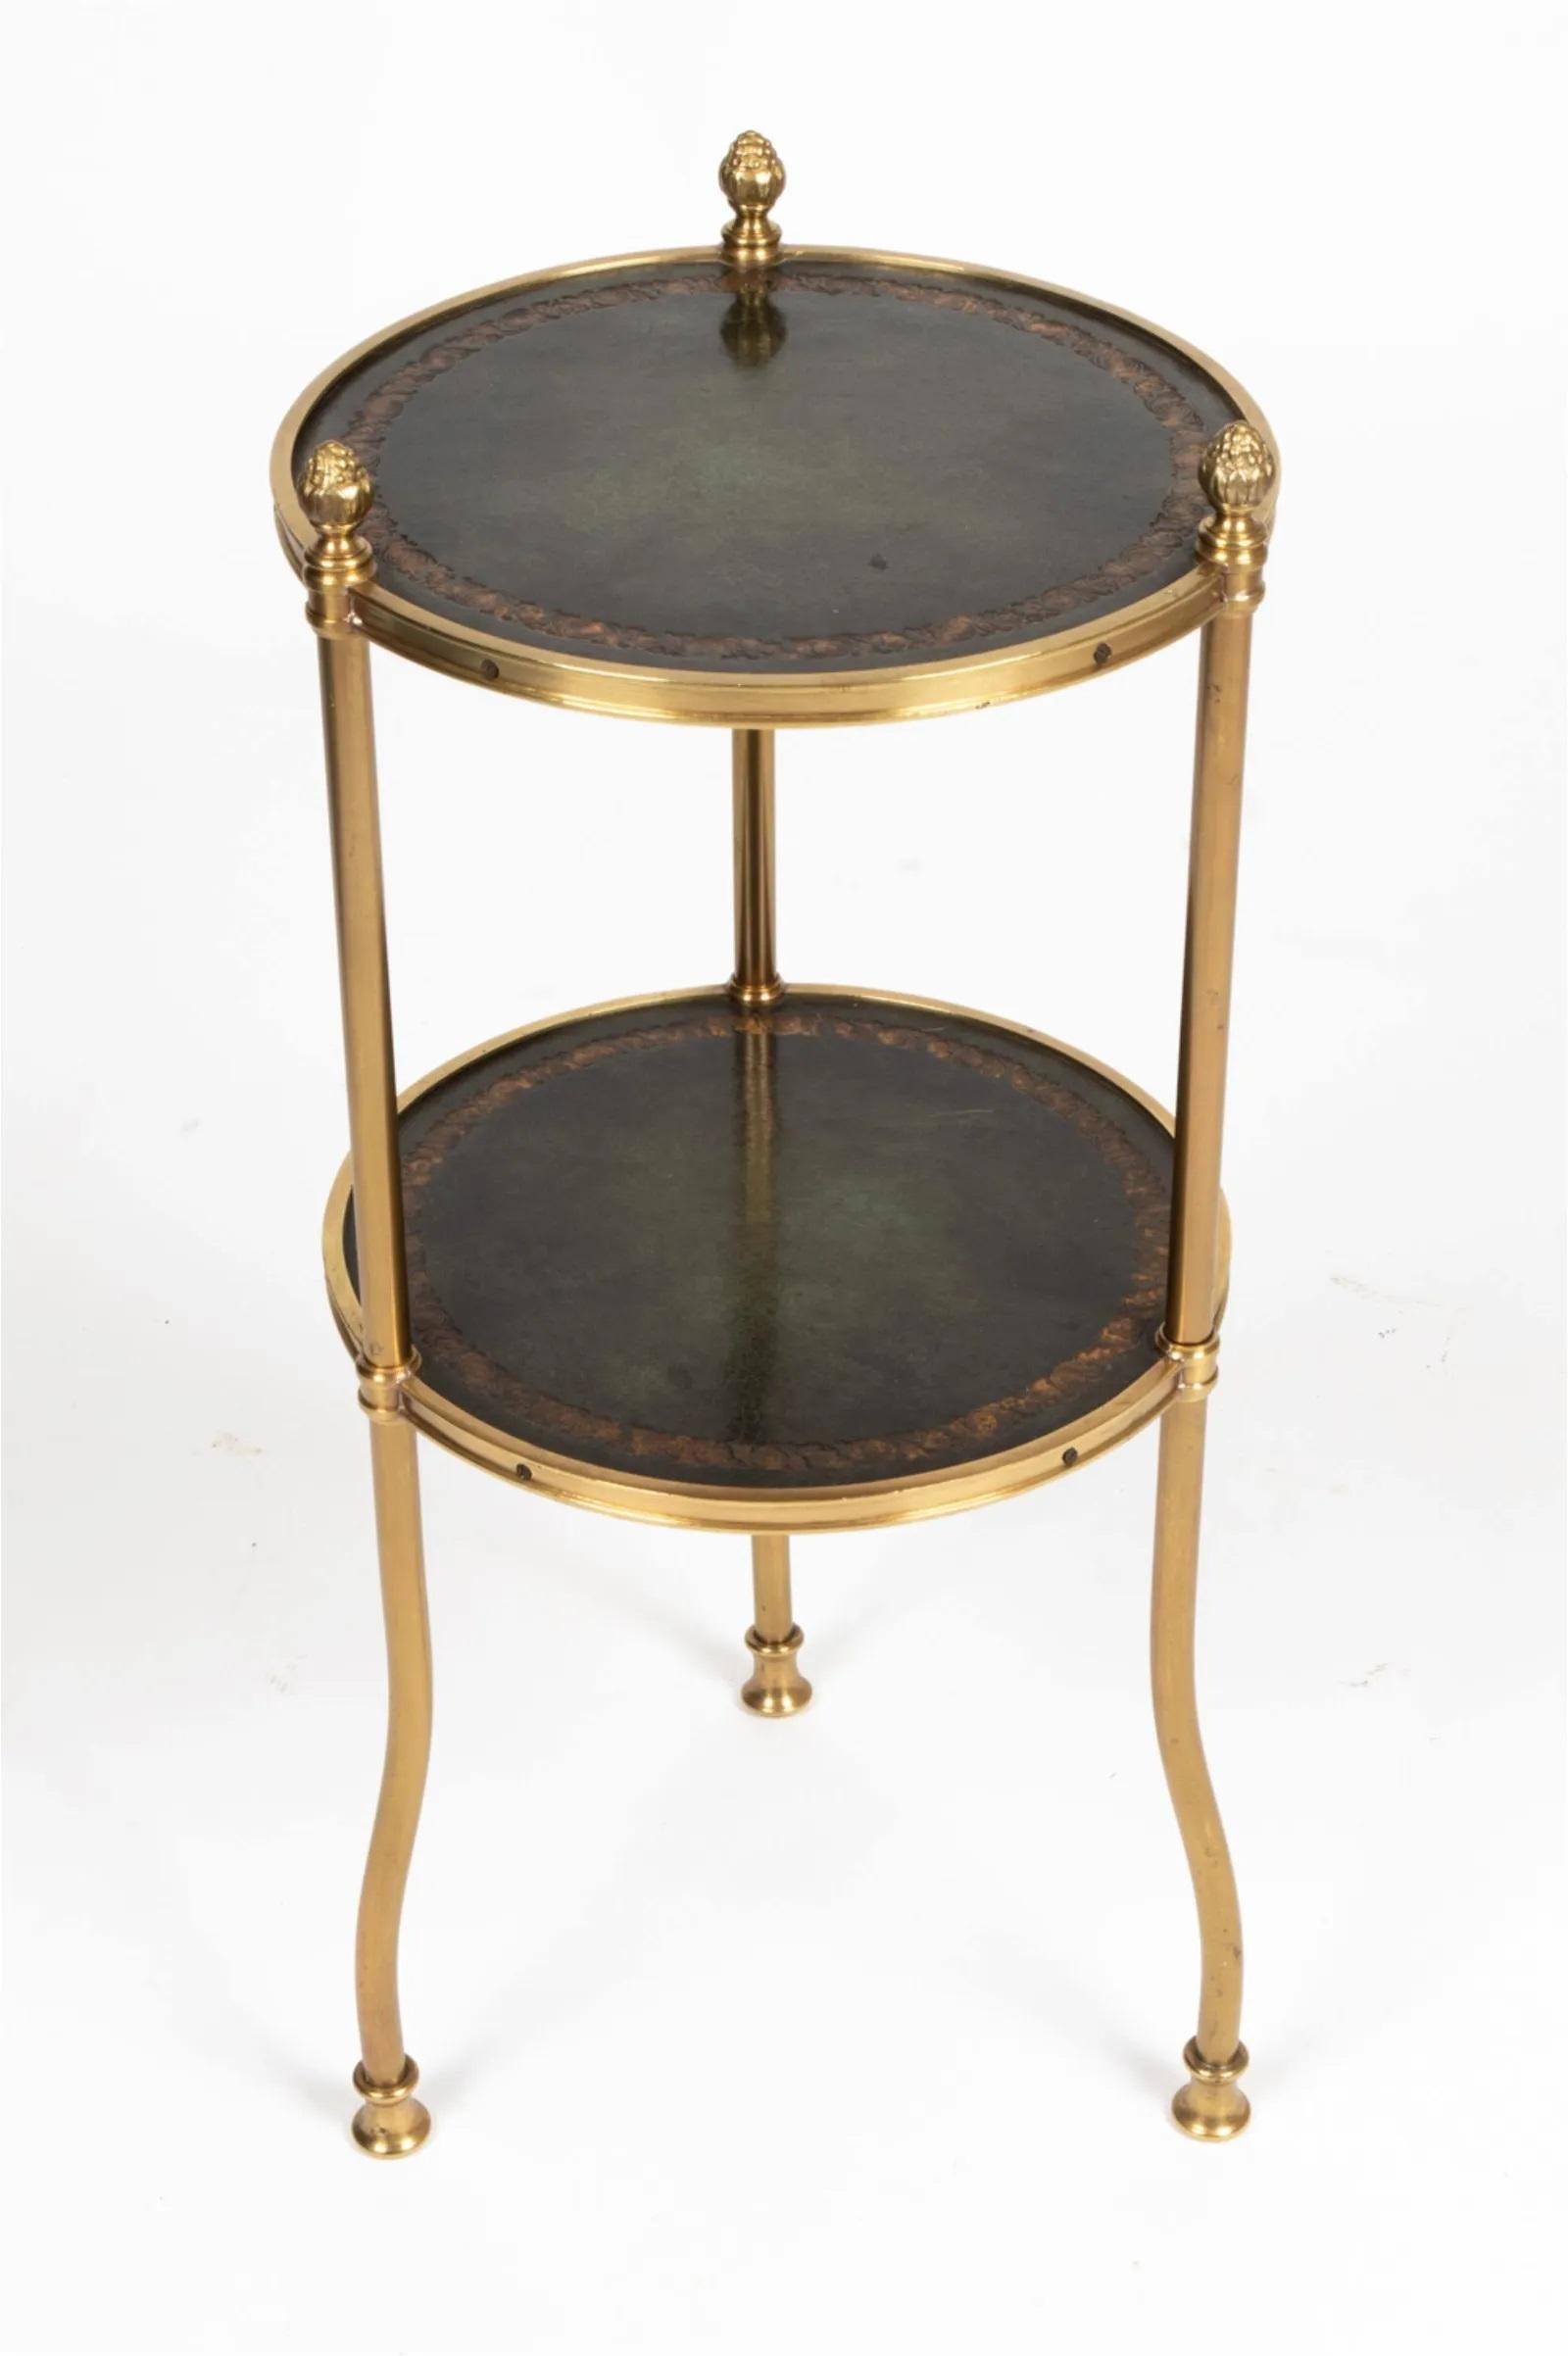 Occasional side table by Hollyhock (retailer LA - Suzanne Rheinstein), with three embossed leather-topped round tiers and curved gilt brass legs with acorn finials.  Inspired by a design by Frances Elkins for the Cypress Point Club.  Circa 1970's.